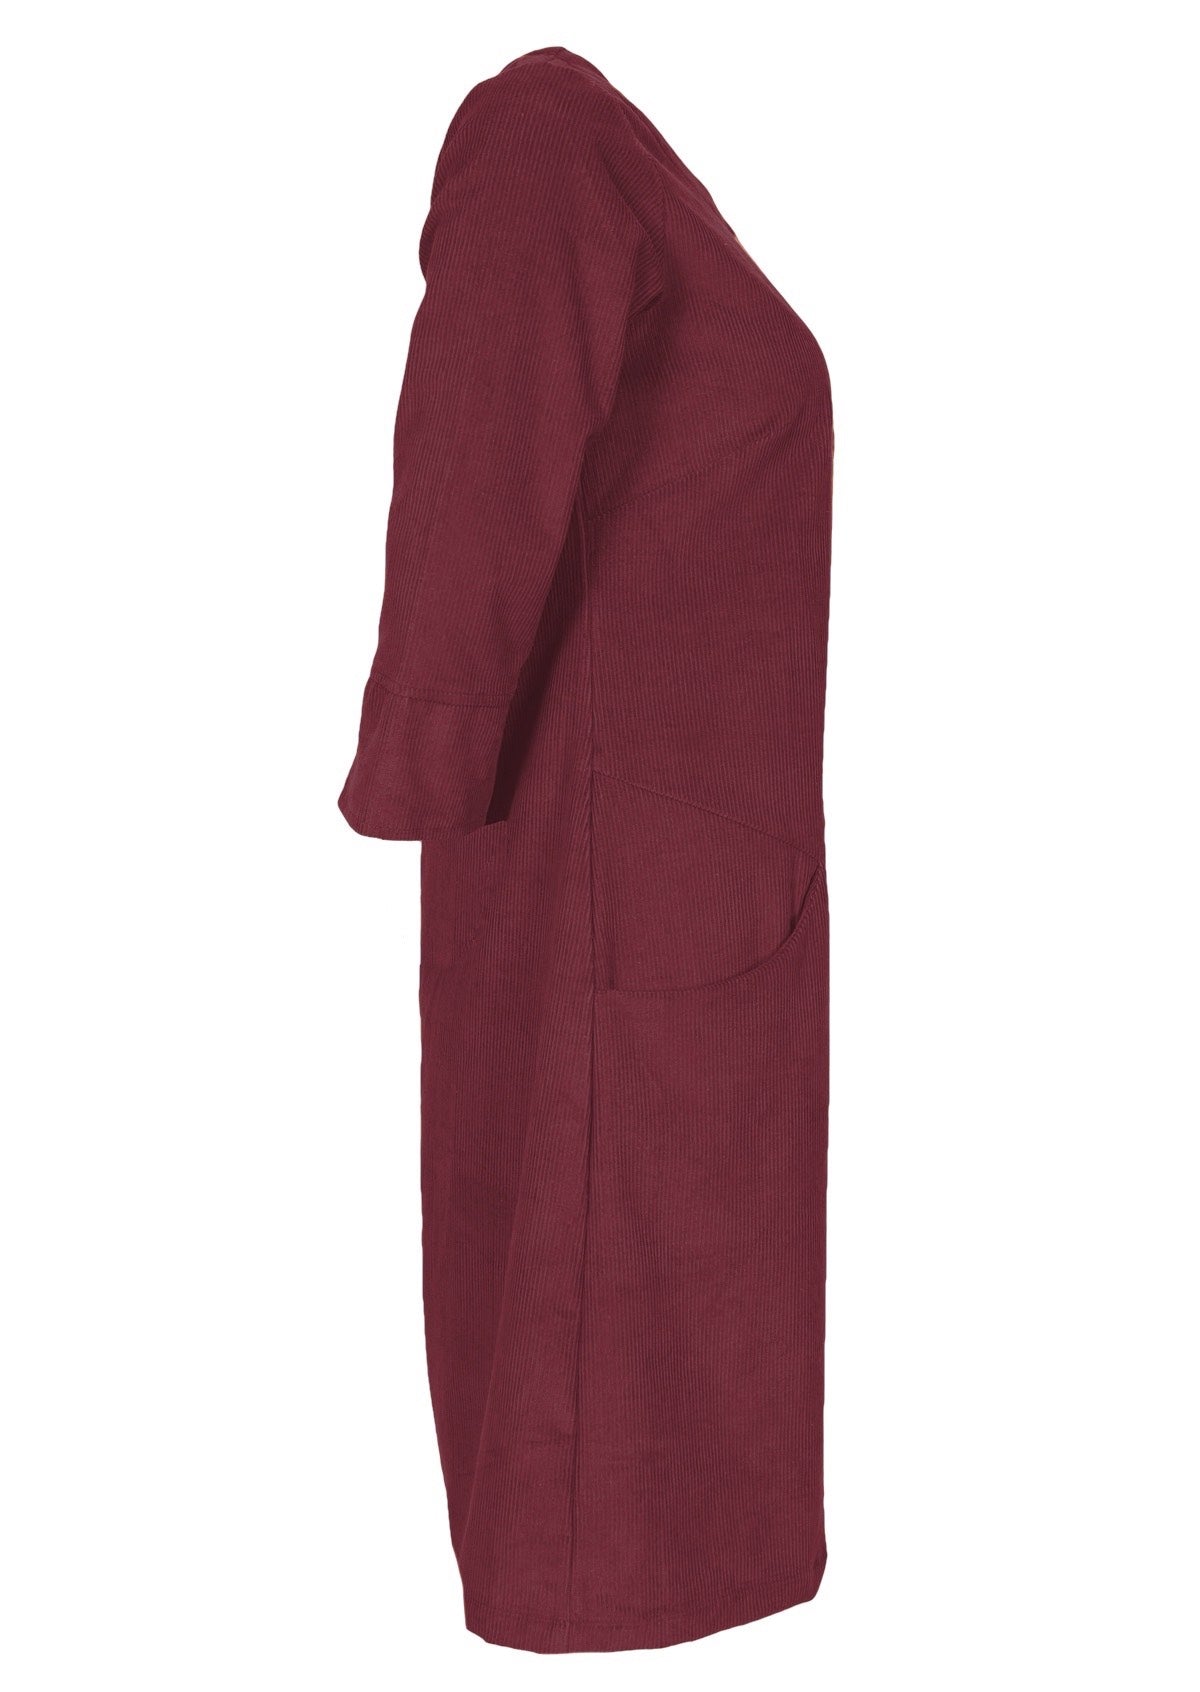 100% cotton corduroy dress in deep red features pockets. 